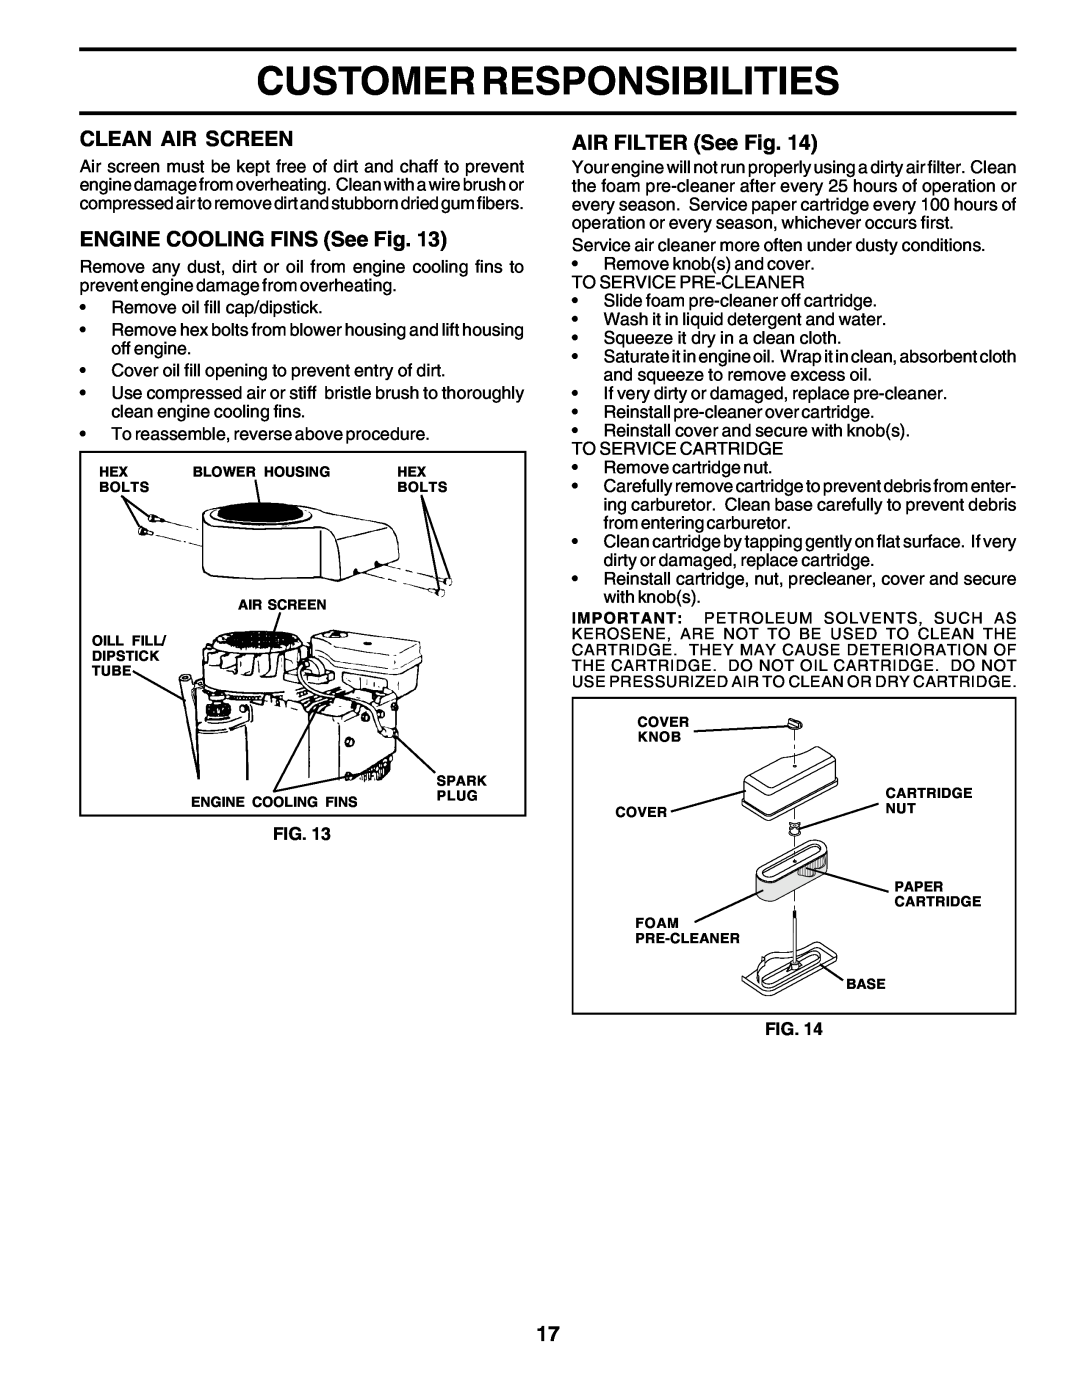 Poulan PC14542D owner manual Customer Responsibilities, Clean Air Screen, ENGINE COOLING FINS See Fig, AIR FILTER See Fig 